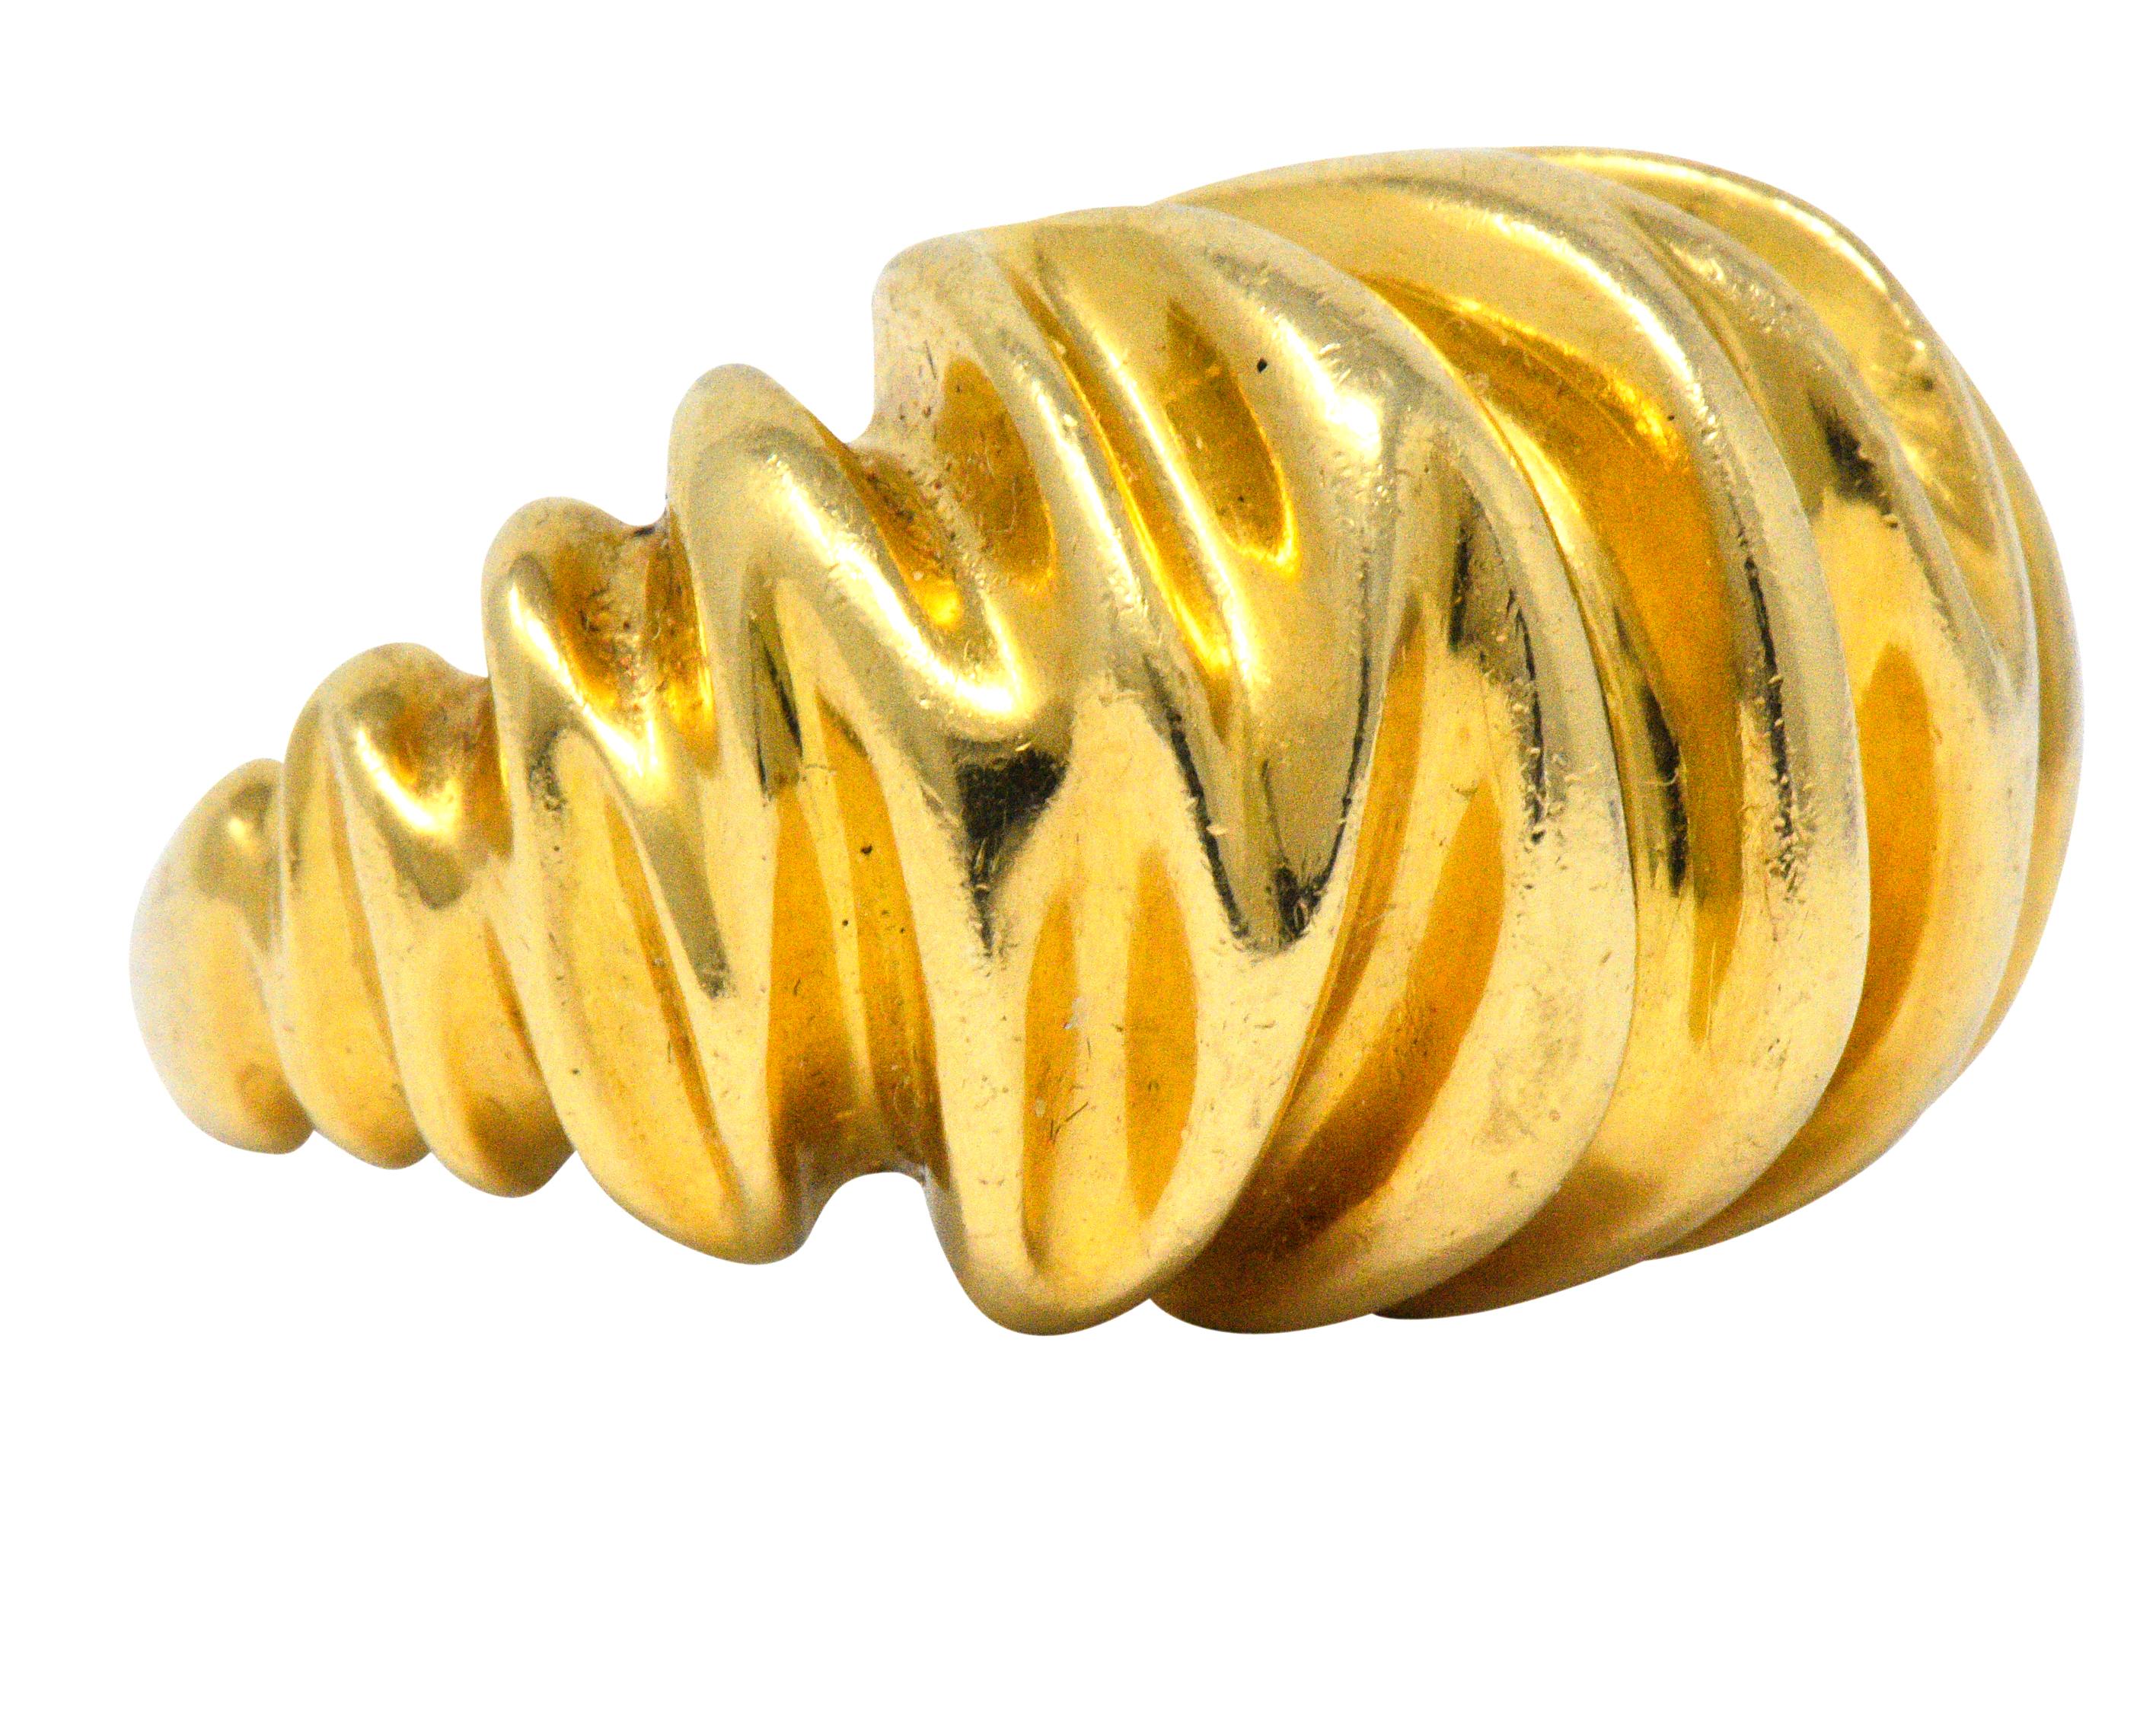 Bombè band ring designed as ruched gold that tapers to shank

Deeply ridged with a bright finish

Fully signed Tiffany & Co.

Stamped 18 Karat for 18 karat gold

Circa 1970s

Ring Size: 7 & sizable

Measures: 17.0 mm wide and sits 13.0 mm